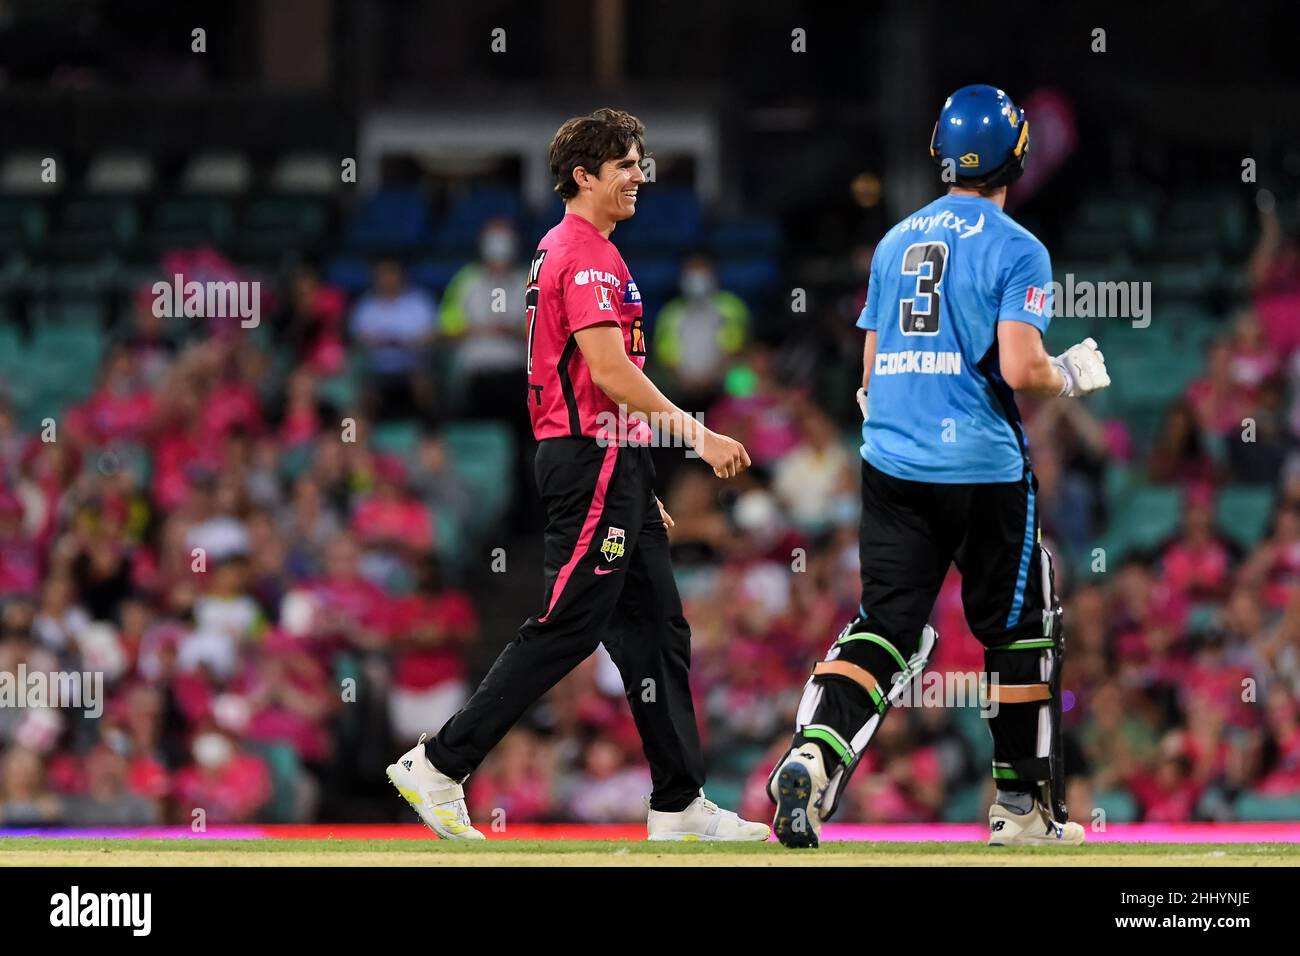 Sydney, Australia, 26 January, 2022. Sean Abbott of the Sixers celebrates getting Thomas Kelly of the Strikers out during the Big Bash League Challenger cricket match between Sydney Sixers and Adelaide Strikers at The Sydney Cricket Ground on January 26, 2022 in Sydney, Australia. Credit: Steven Markham/Speed Media/Alamy Live News Stock Photo